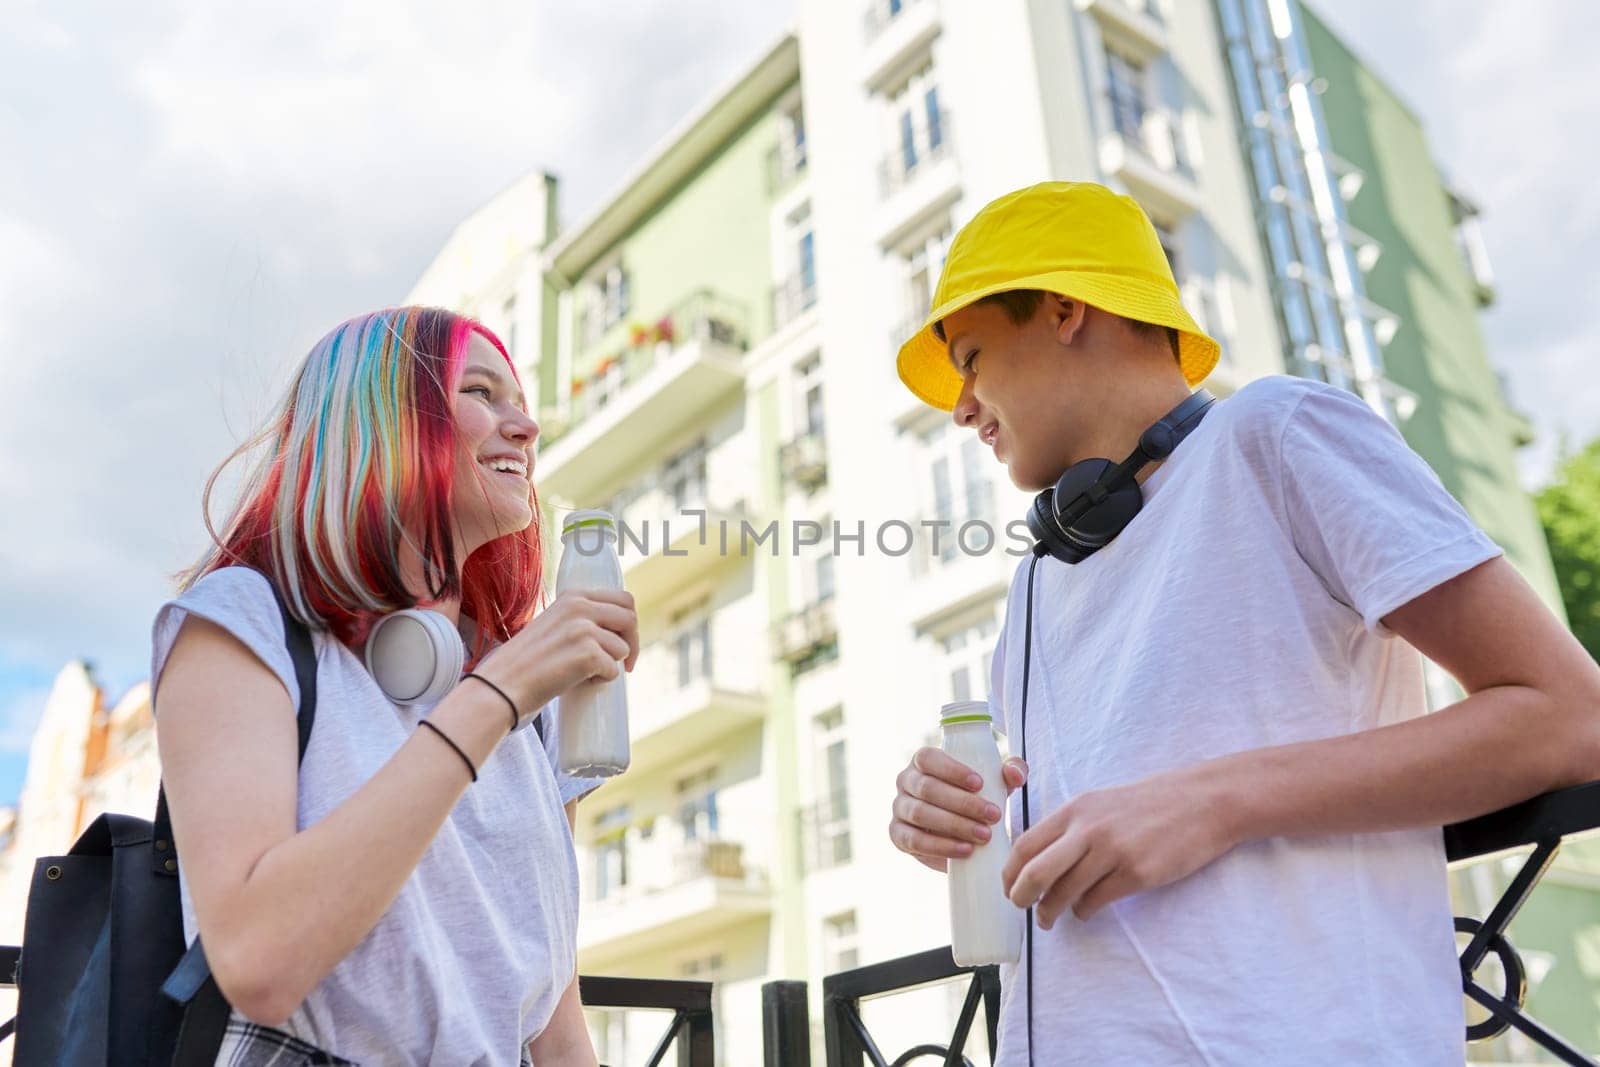 Couple of college students talking having rest drinking milk drink in bottle outdoors by VH-studio